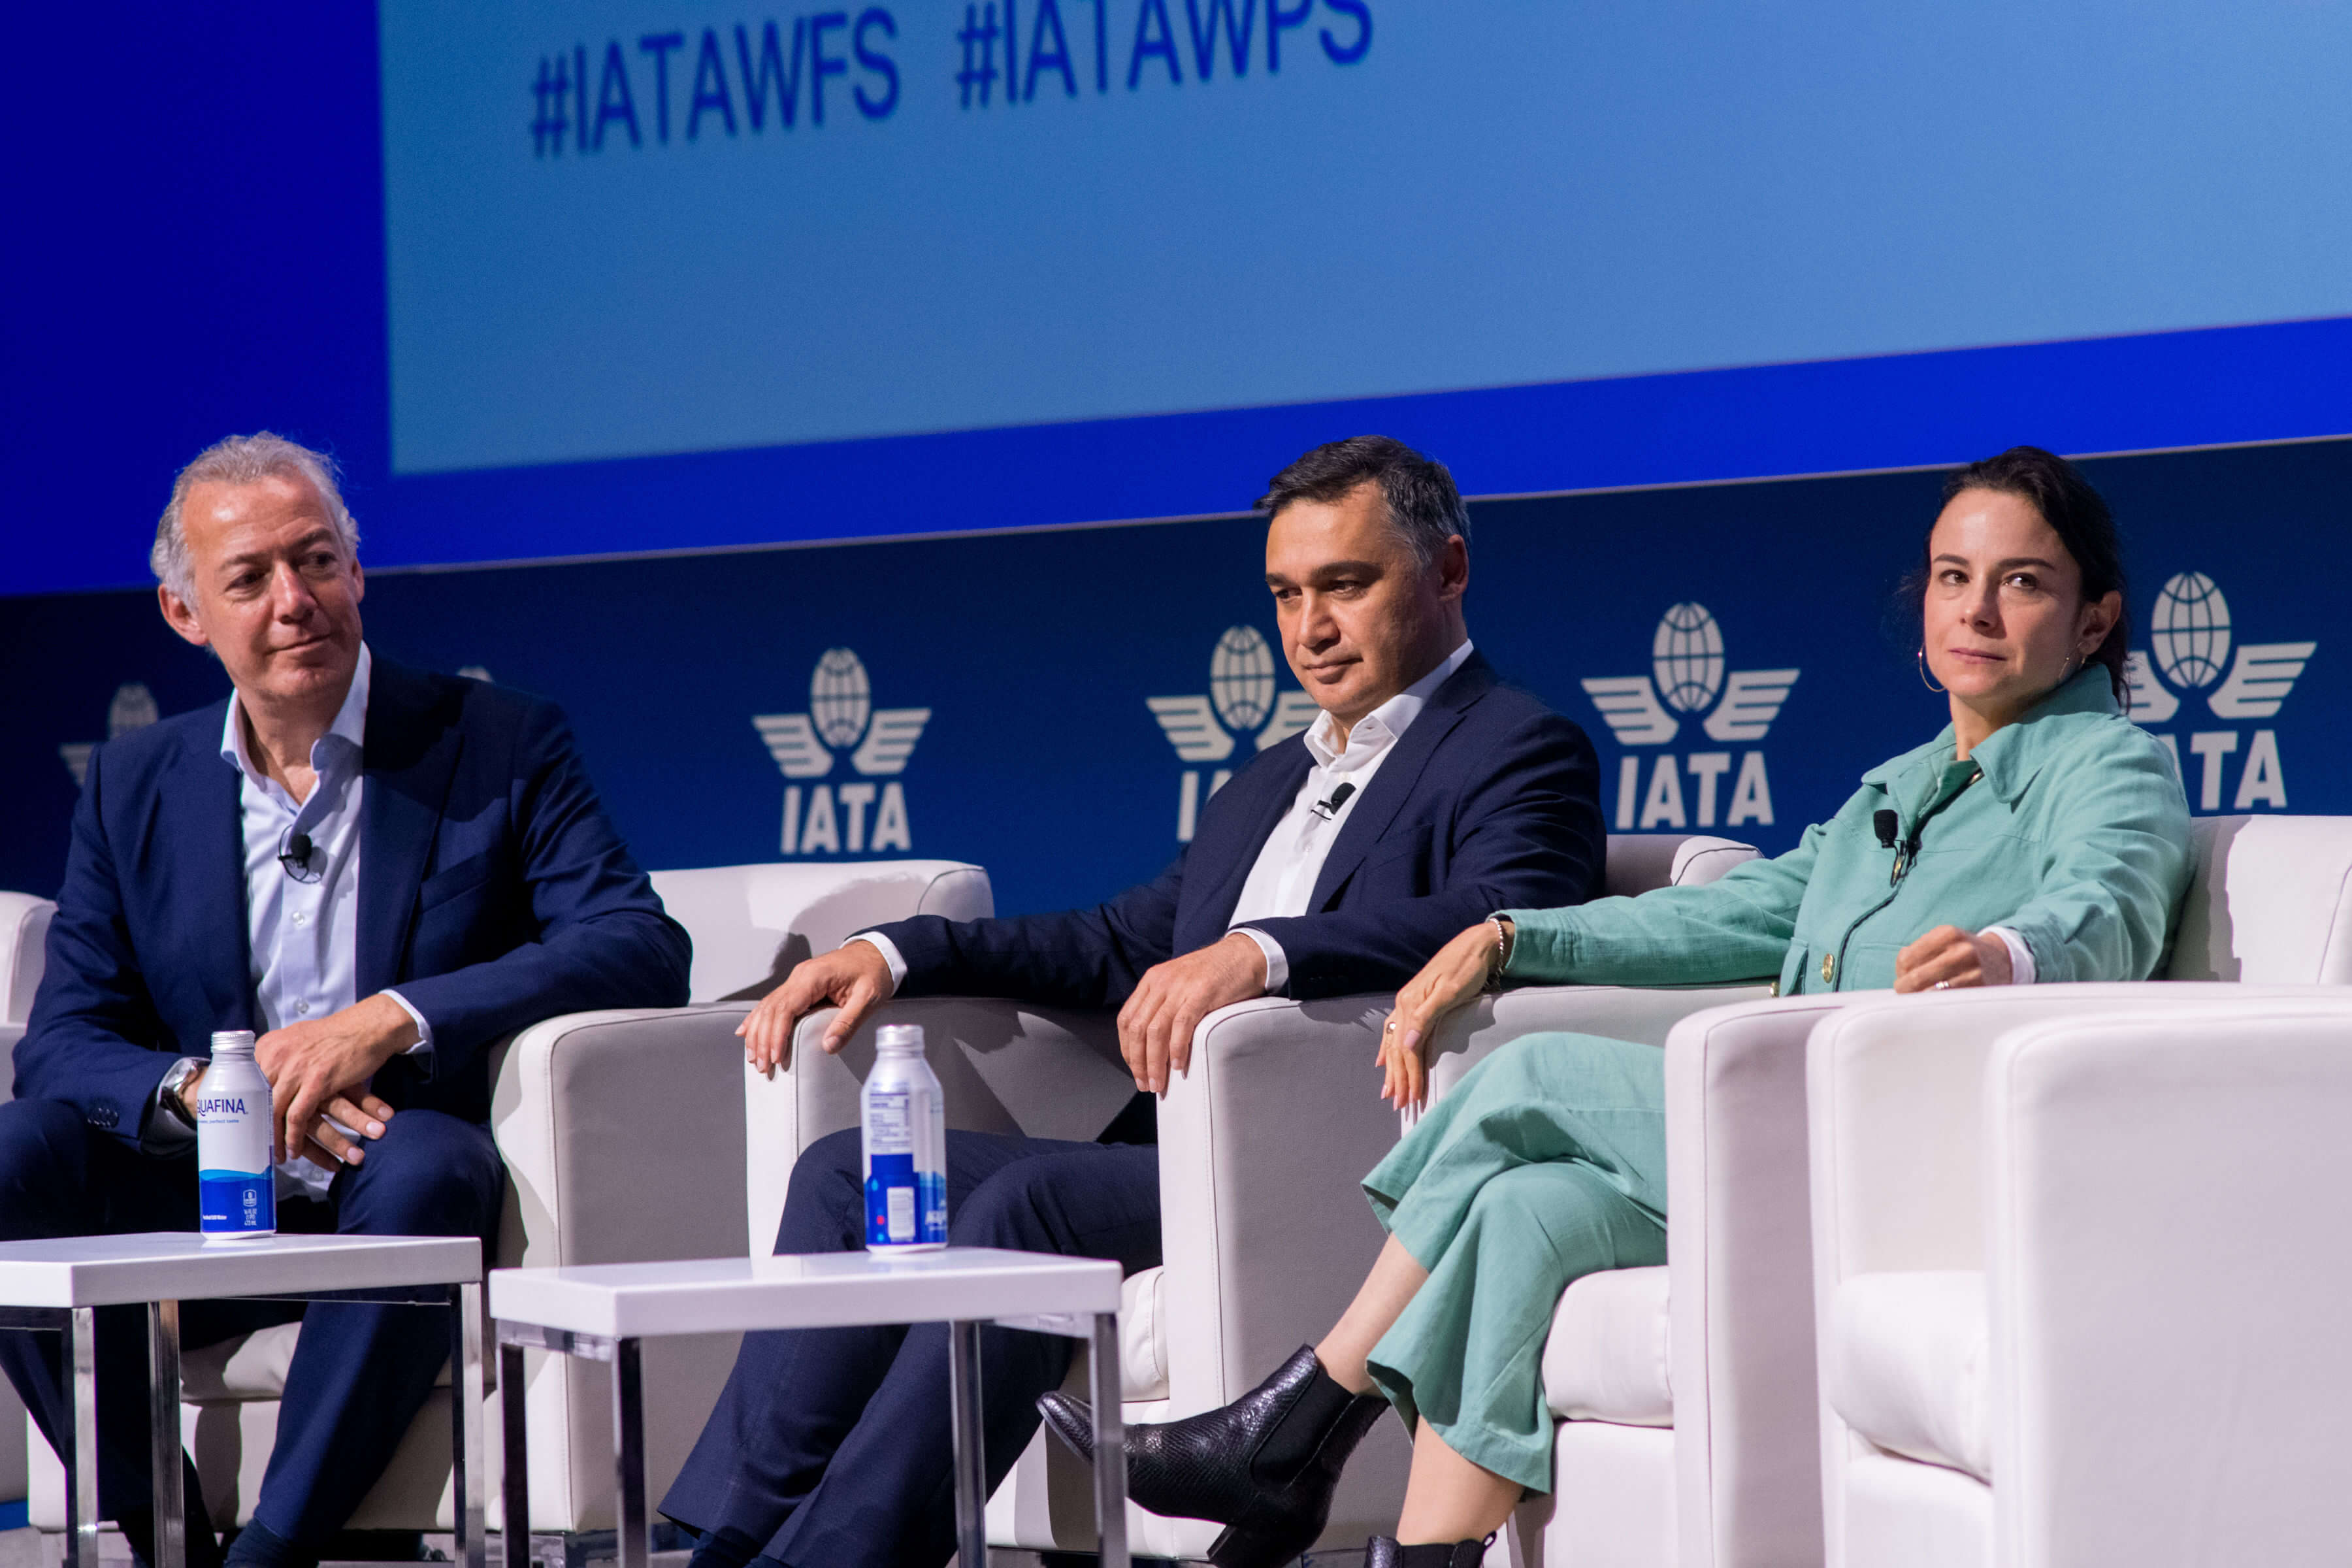  We participated in the World Passenger Symposium organized by IATA